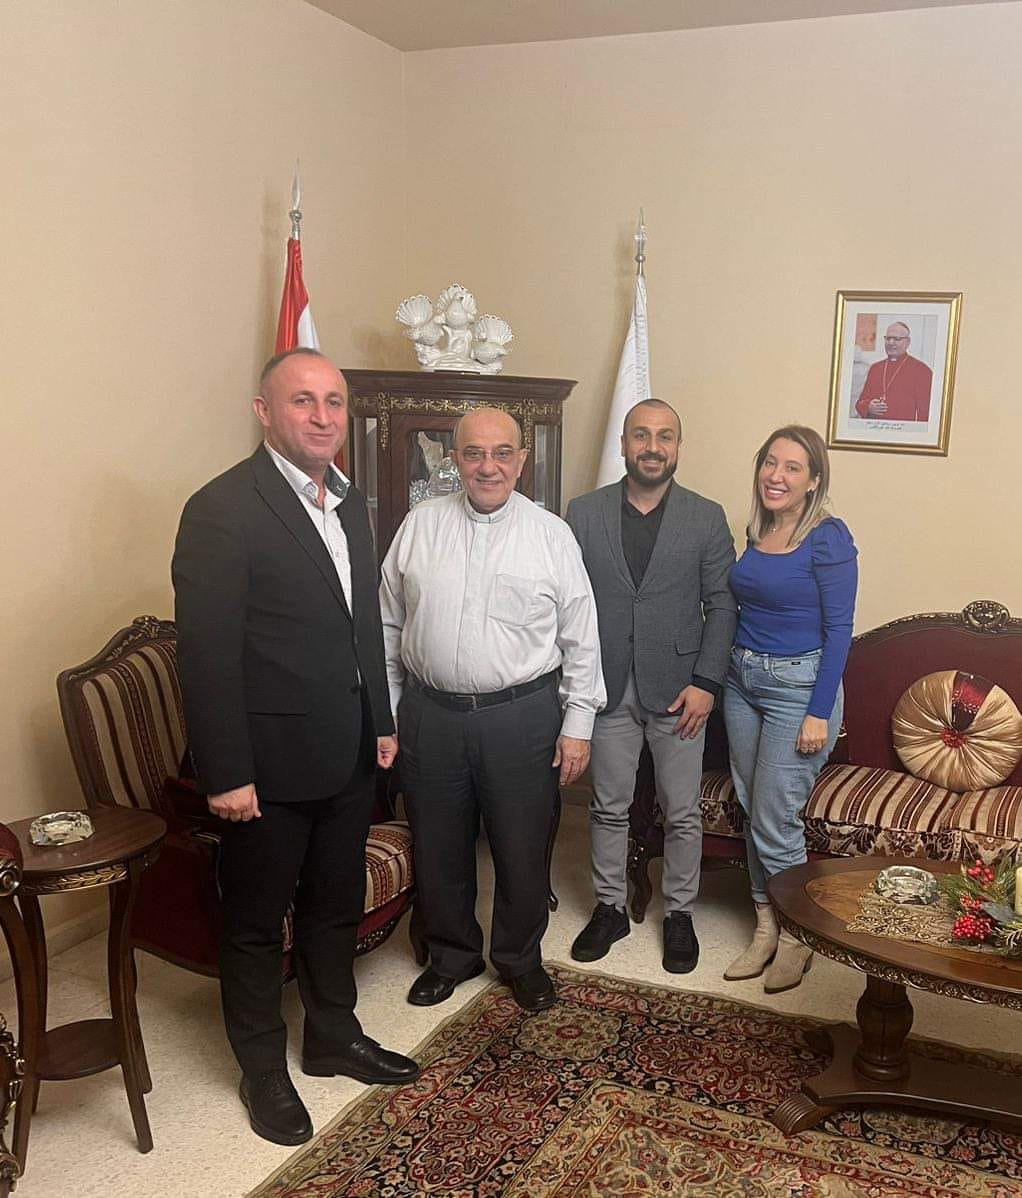 Visit of the Director of the Iraq Office of the Chaldean Community Foundation in America